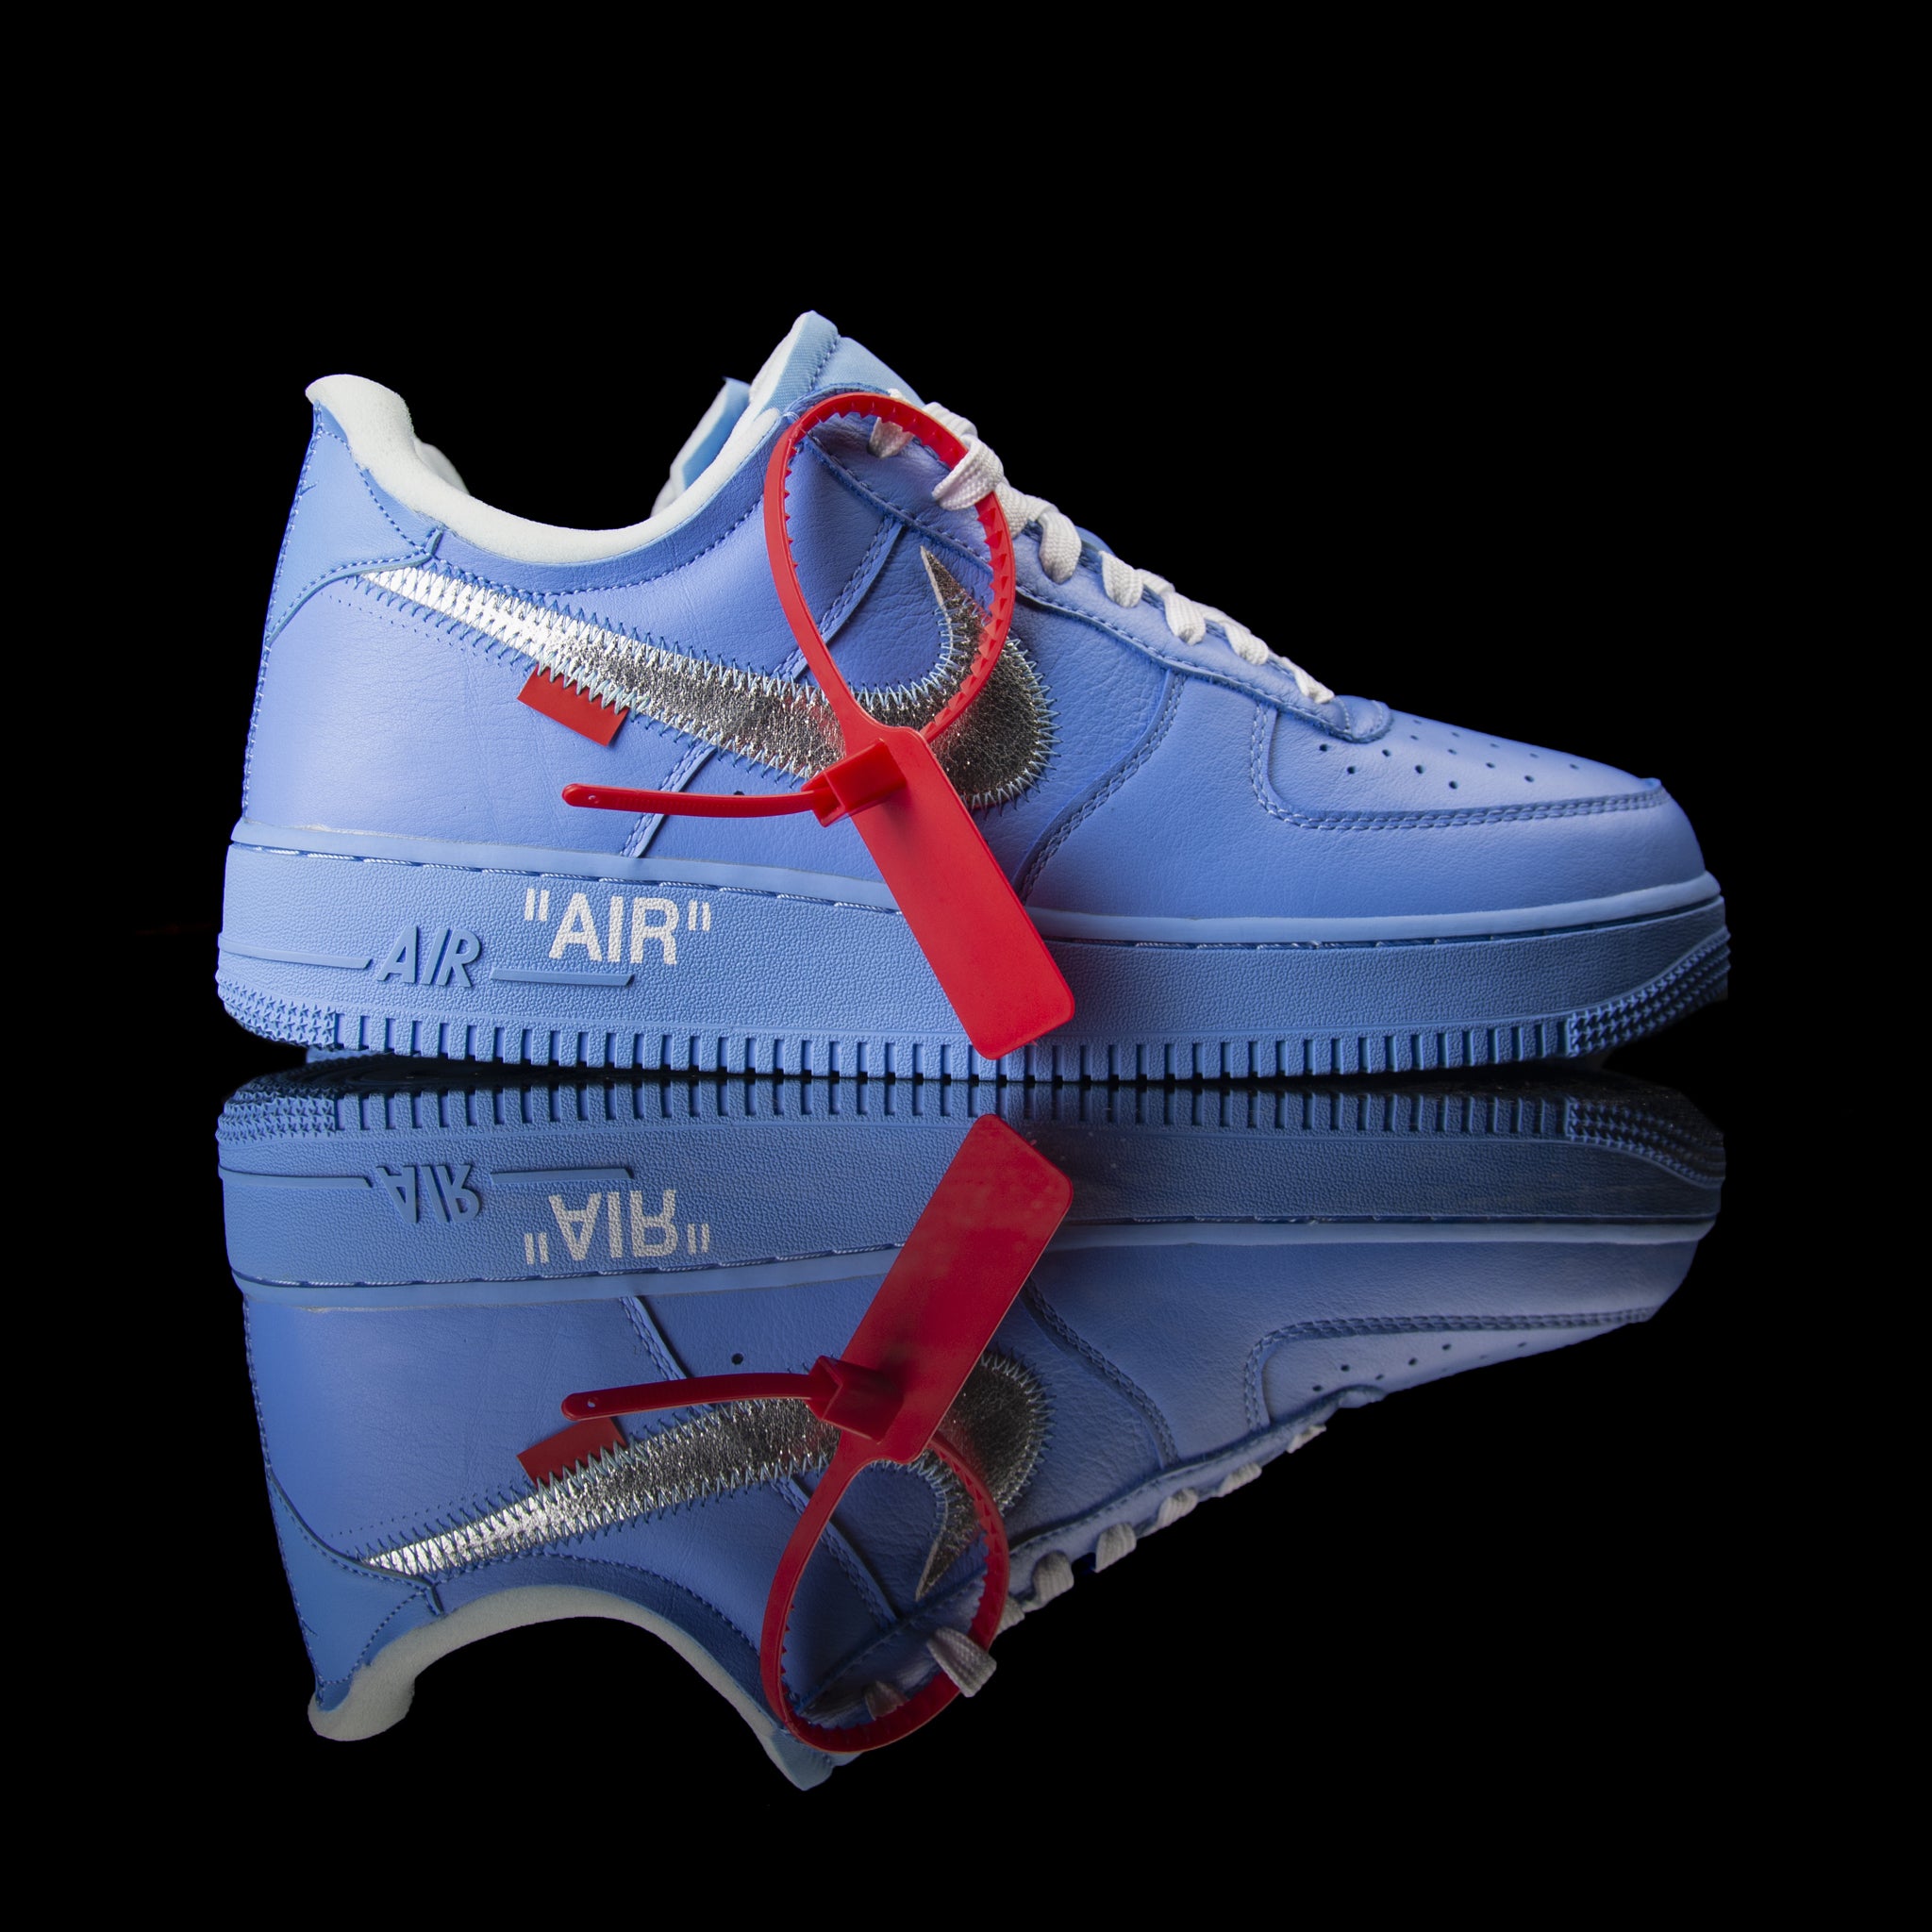 Nike x Off-White Air Force 1 Low 'MCA' University Blue - Exclusive Sneakers  SA